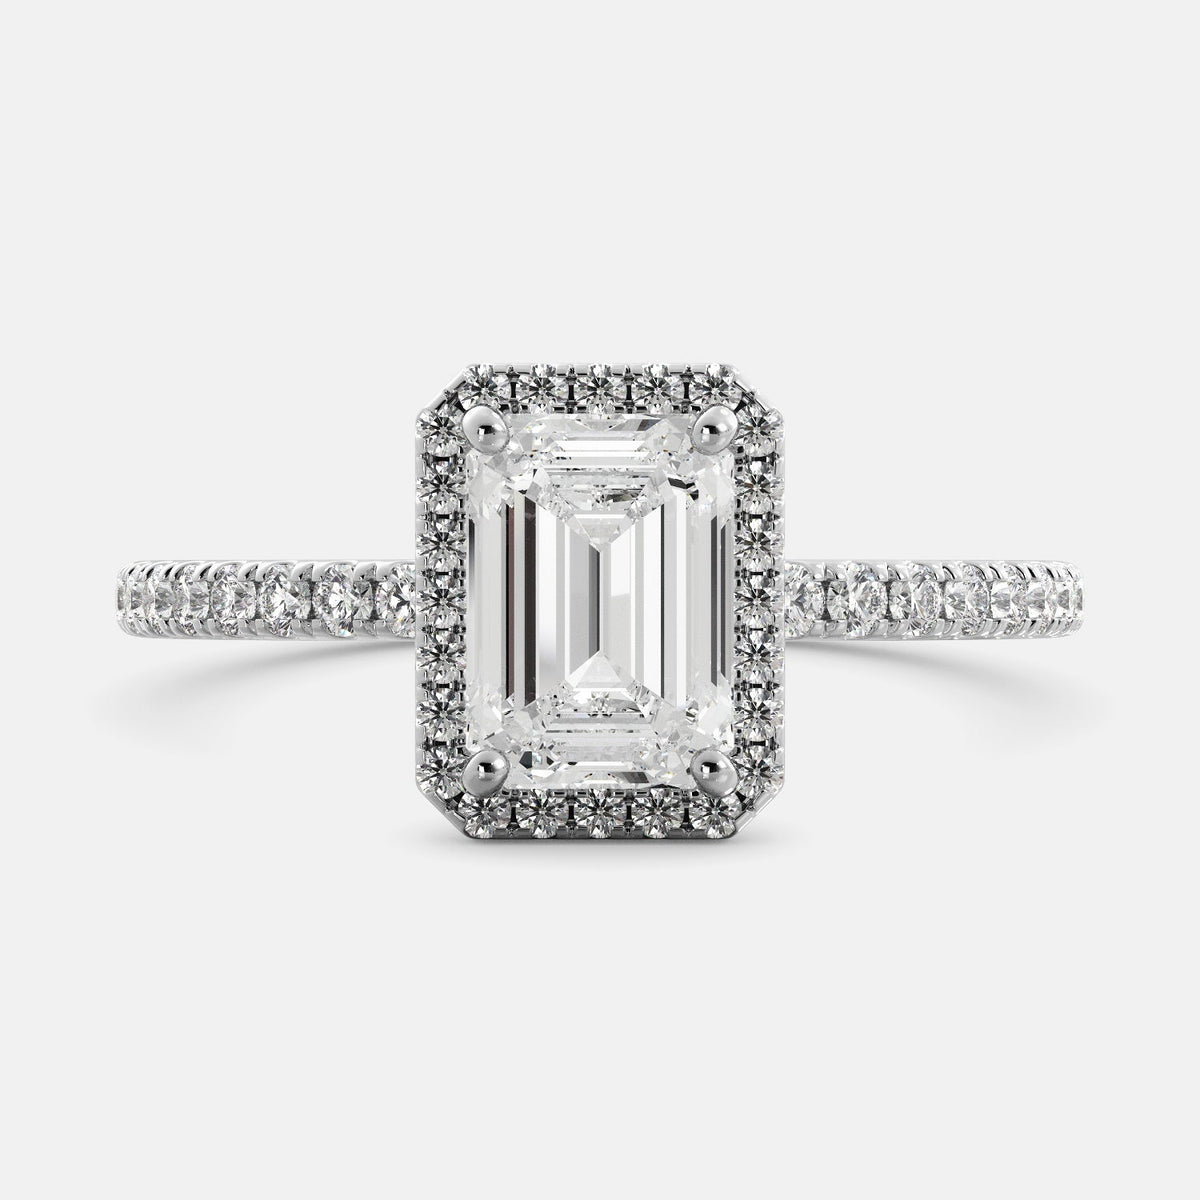 This image shows a stunning emerald halo lab-grown diamond ring with pavé on a white gold band. The ring features a 1.5-carat emerald-cut lab-grown diamond in the center, surrounded by a halo of smaller lab-grown diamonds. The ring is made of 14k white gold and is available in a variety of sizes.